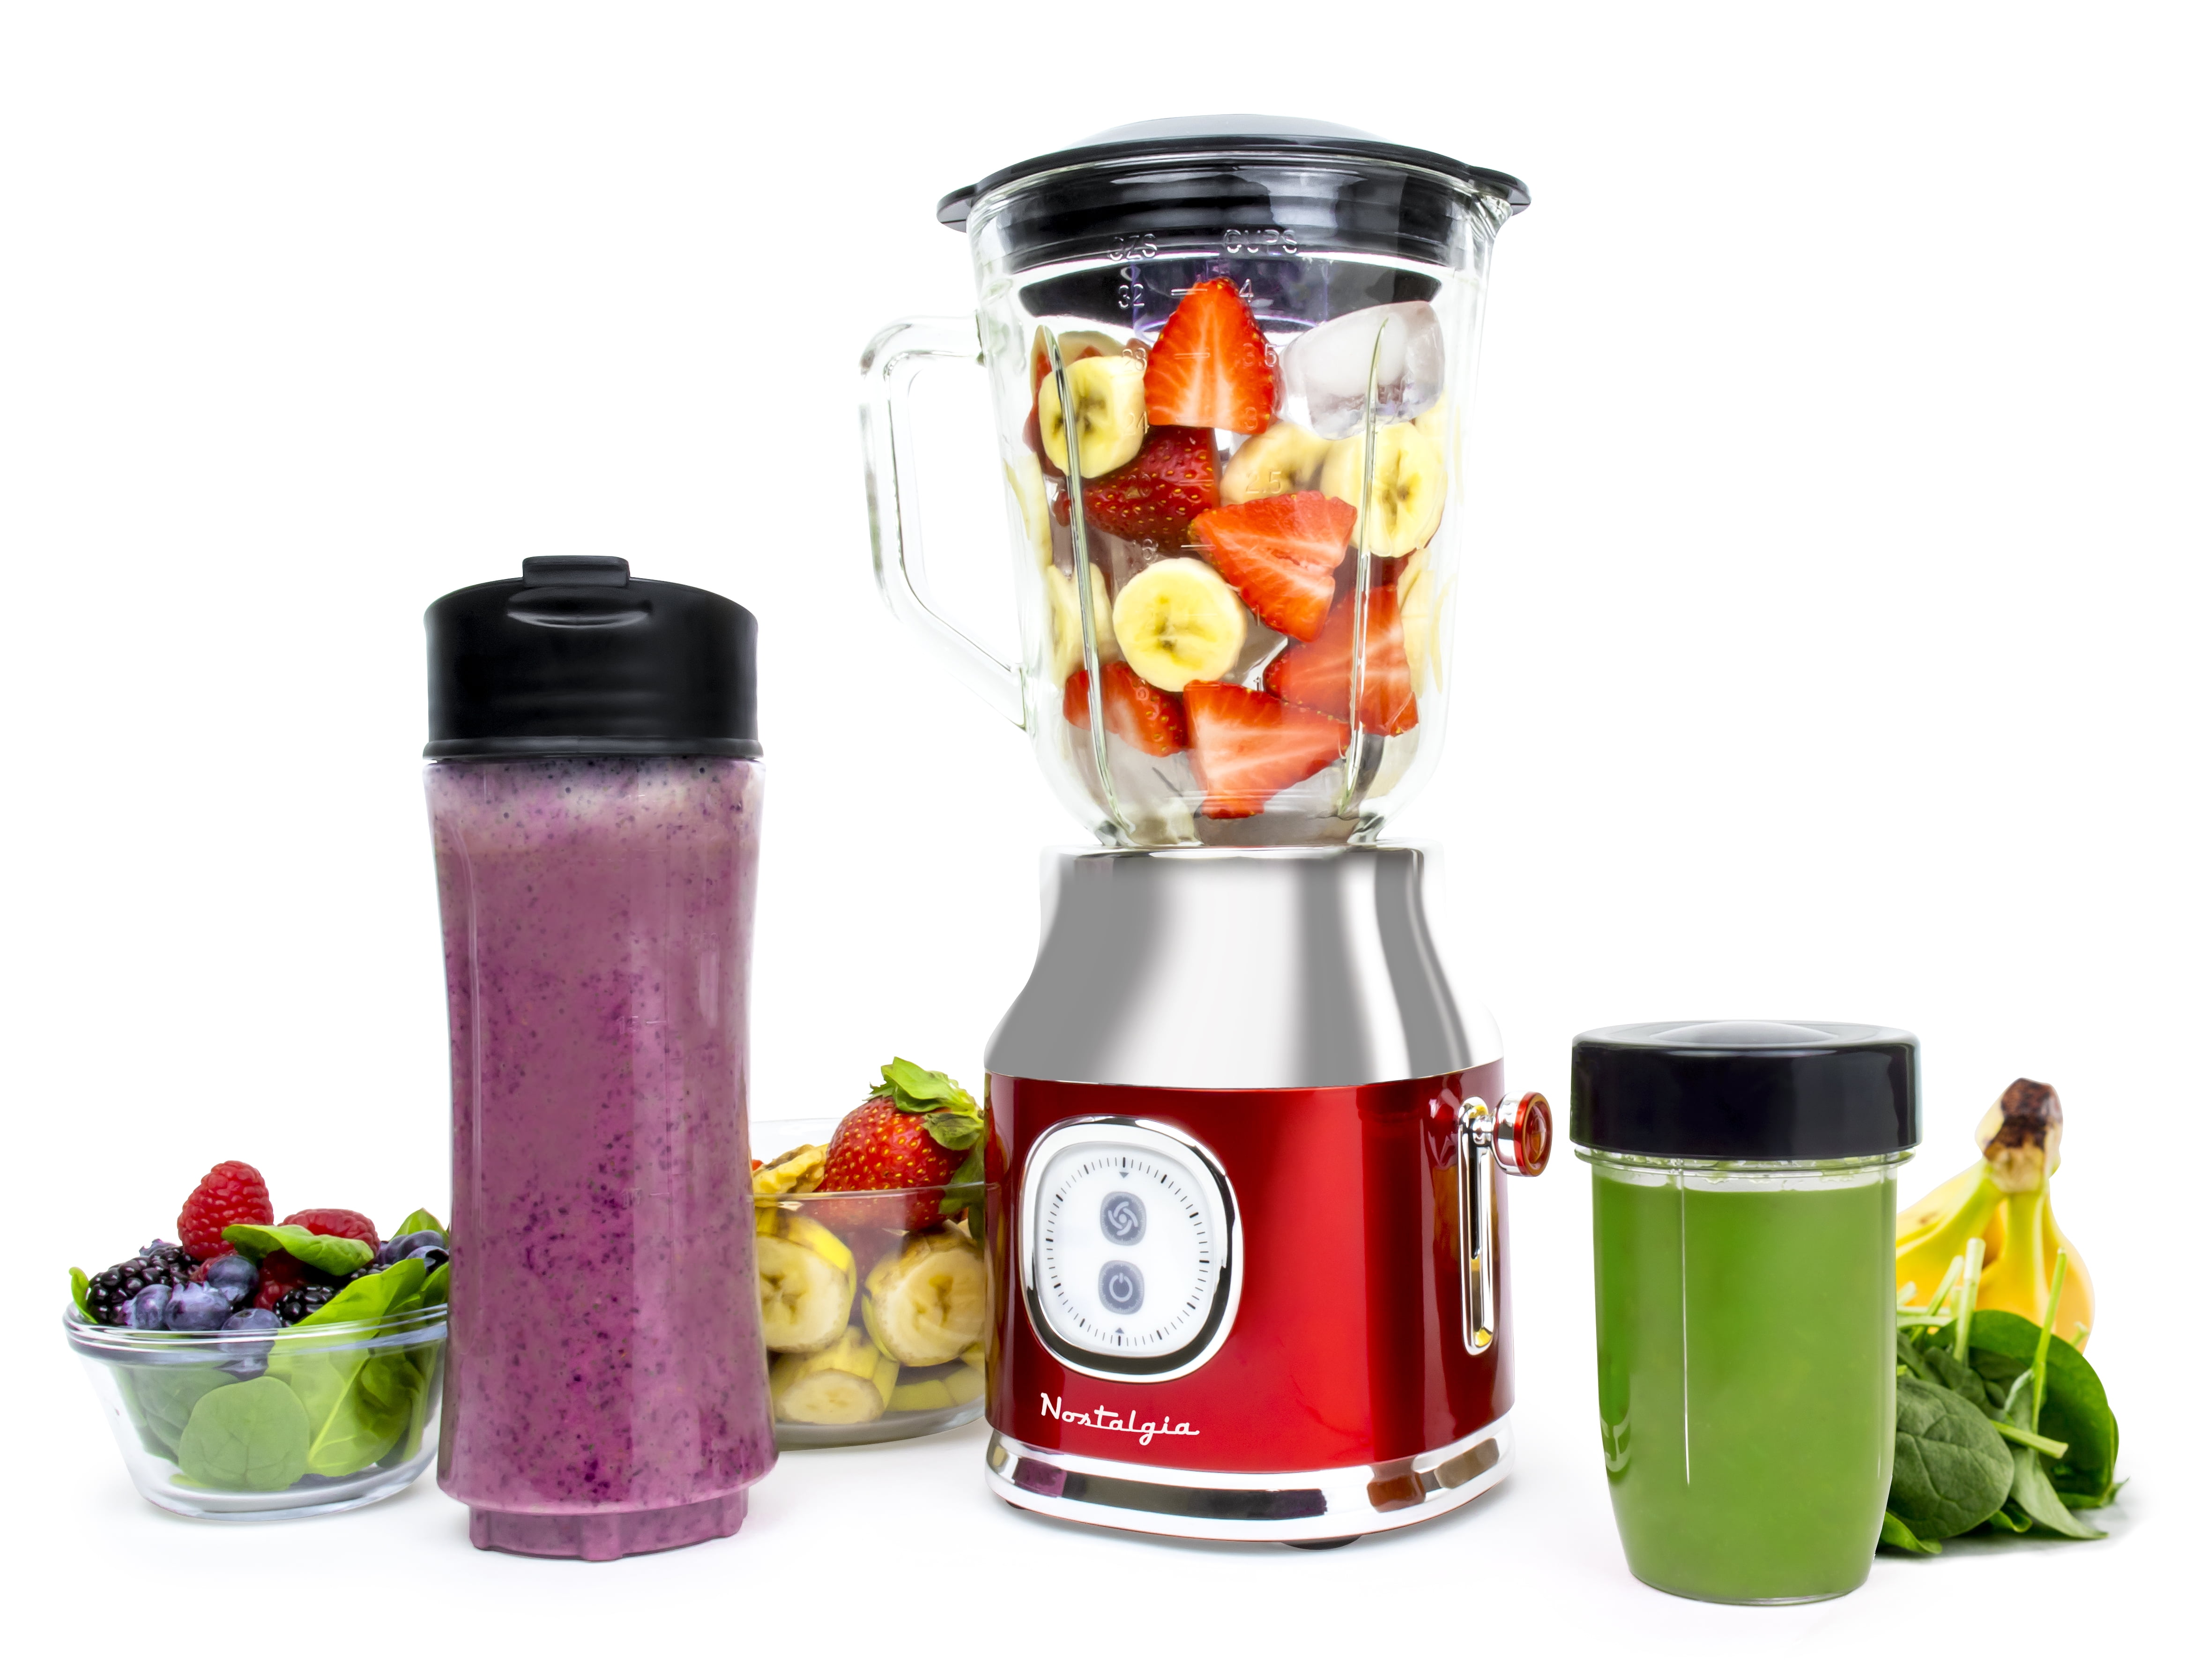 110V Commercial Smoothie Blenders, 1.5L/50.7oz 1500W Countertop